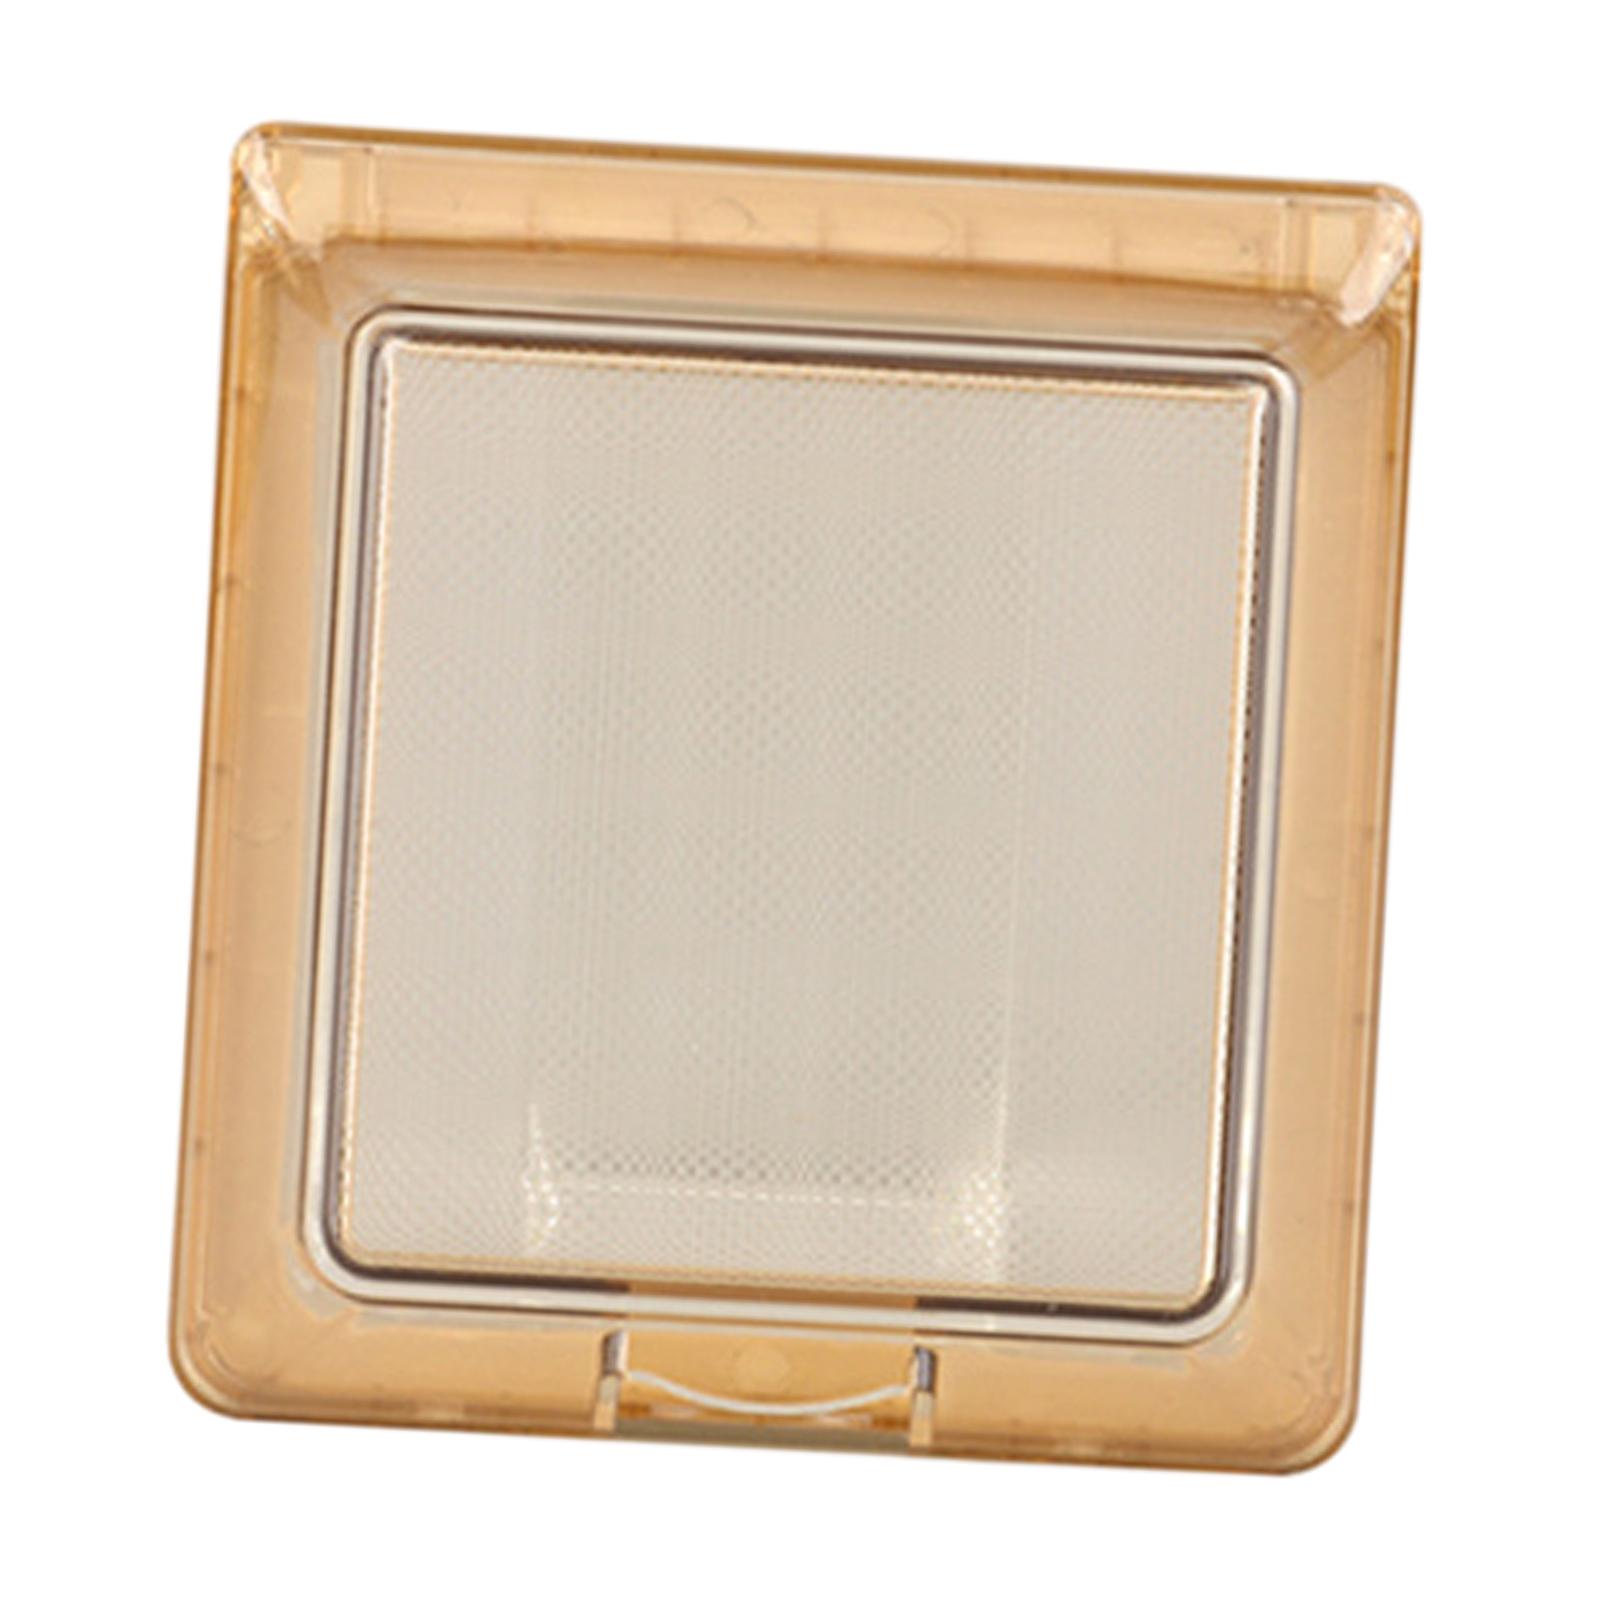 Switch Cover Waterproof Wall Switch Box for Home Improvement Workshop Office Clear Orange